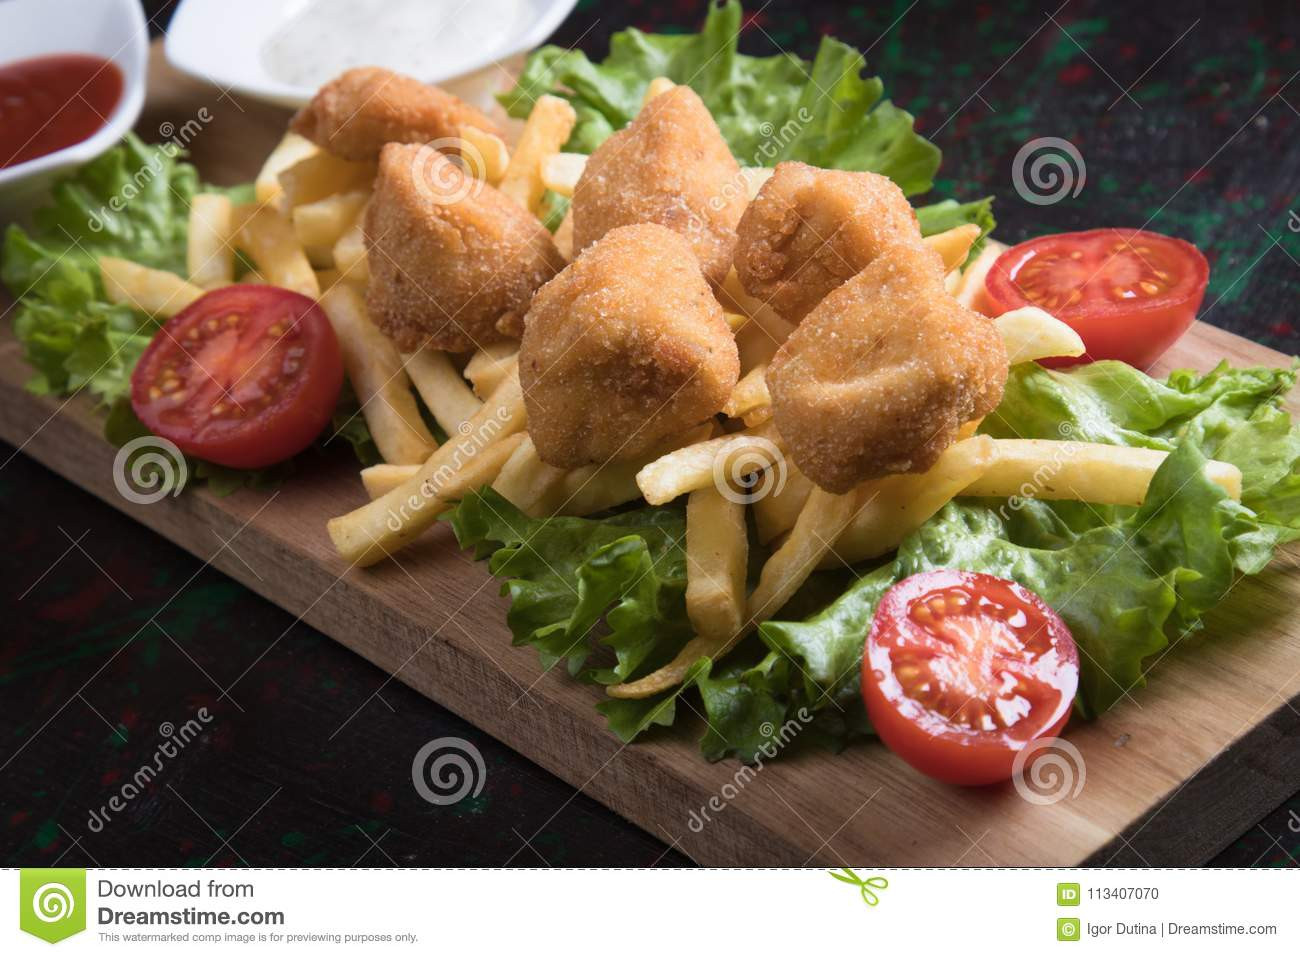 Deep Fried Chicken Nuggets
 Deep fried chicken nug s stock photo Image of fast